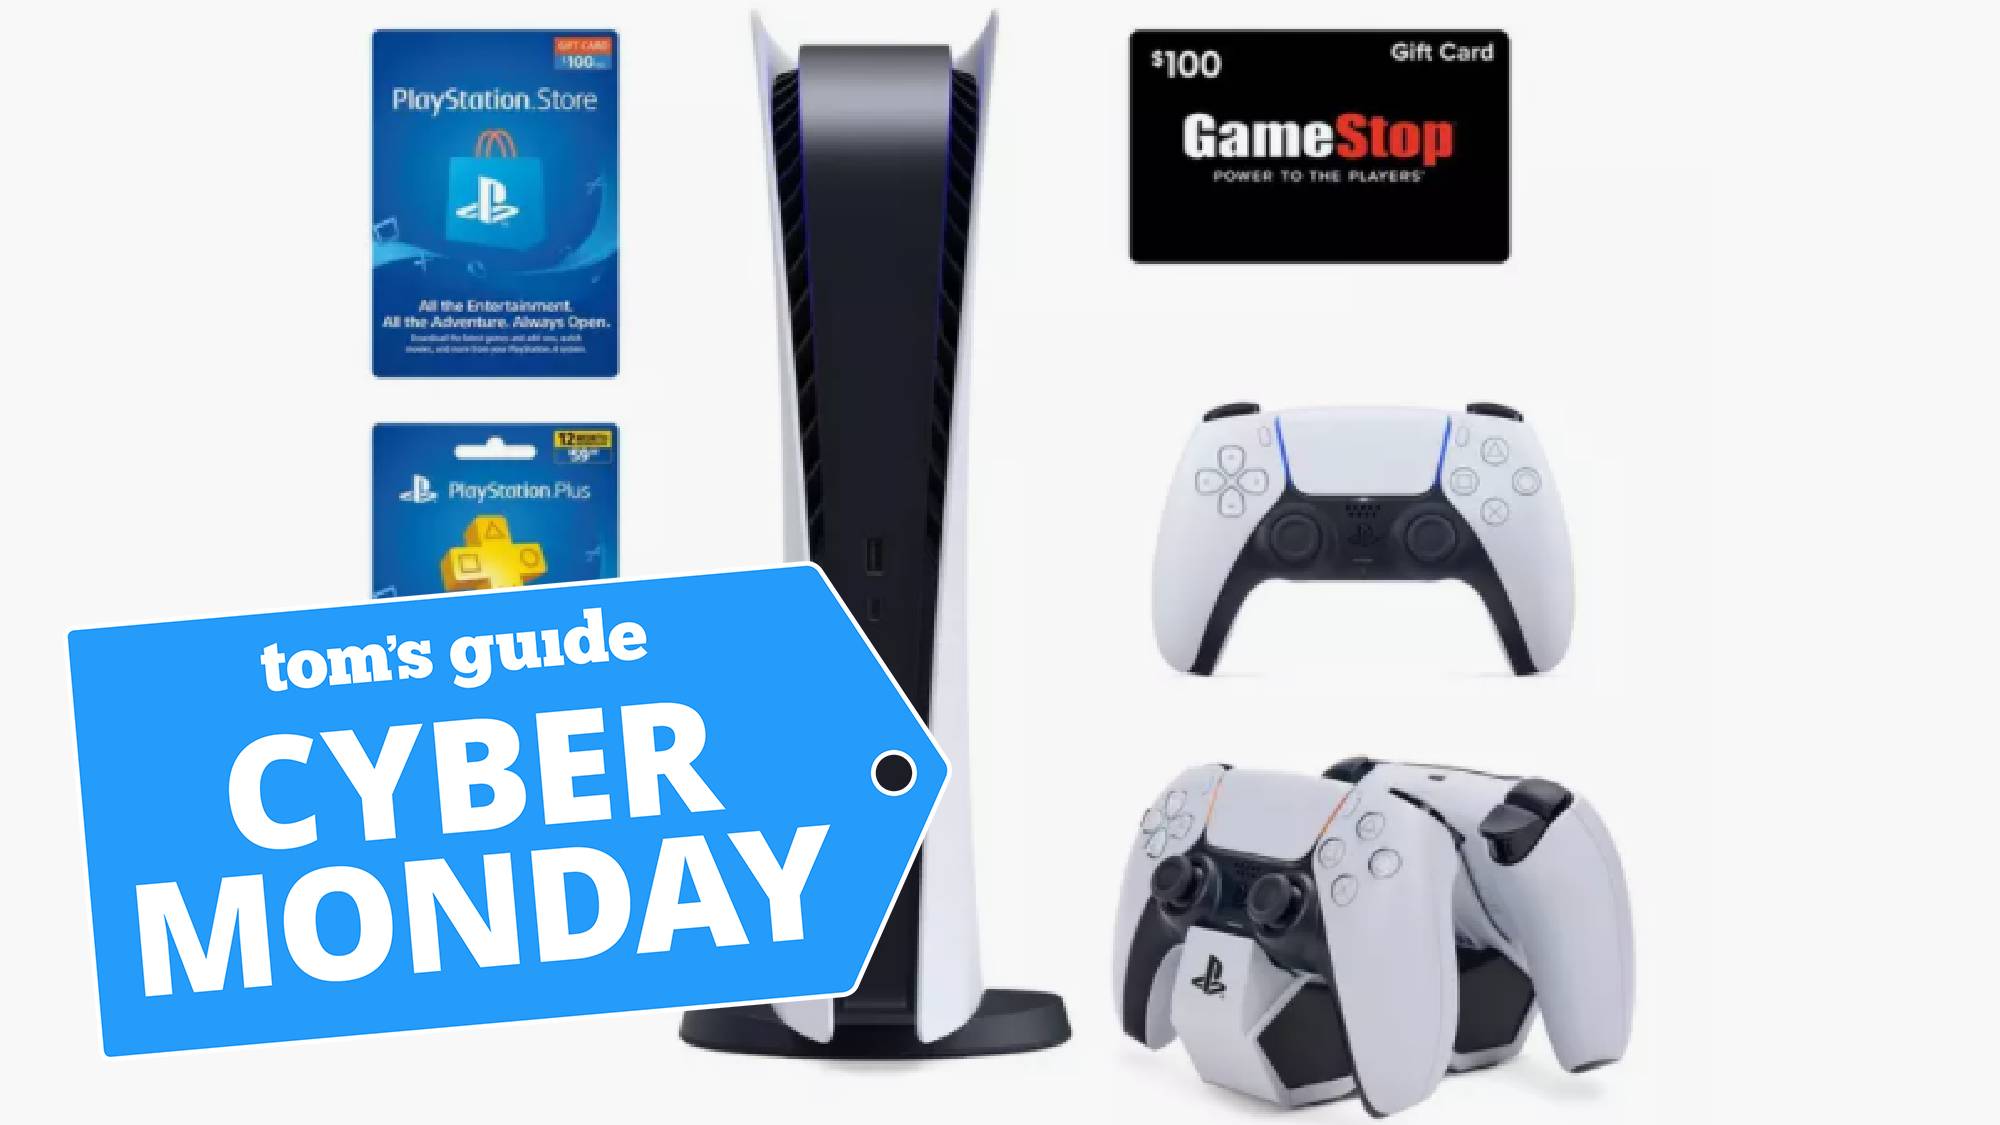 PS5 bundle at GameStop with Cyber ​​Monday Dell tag